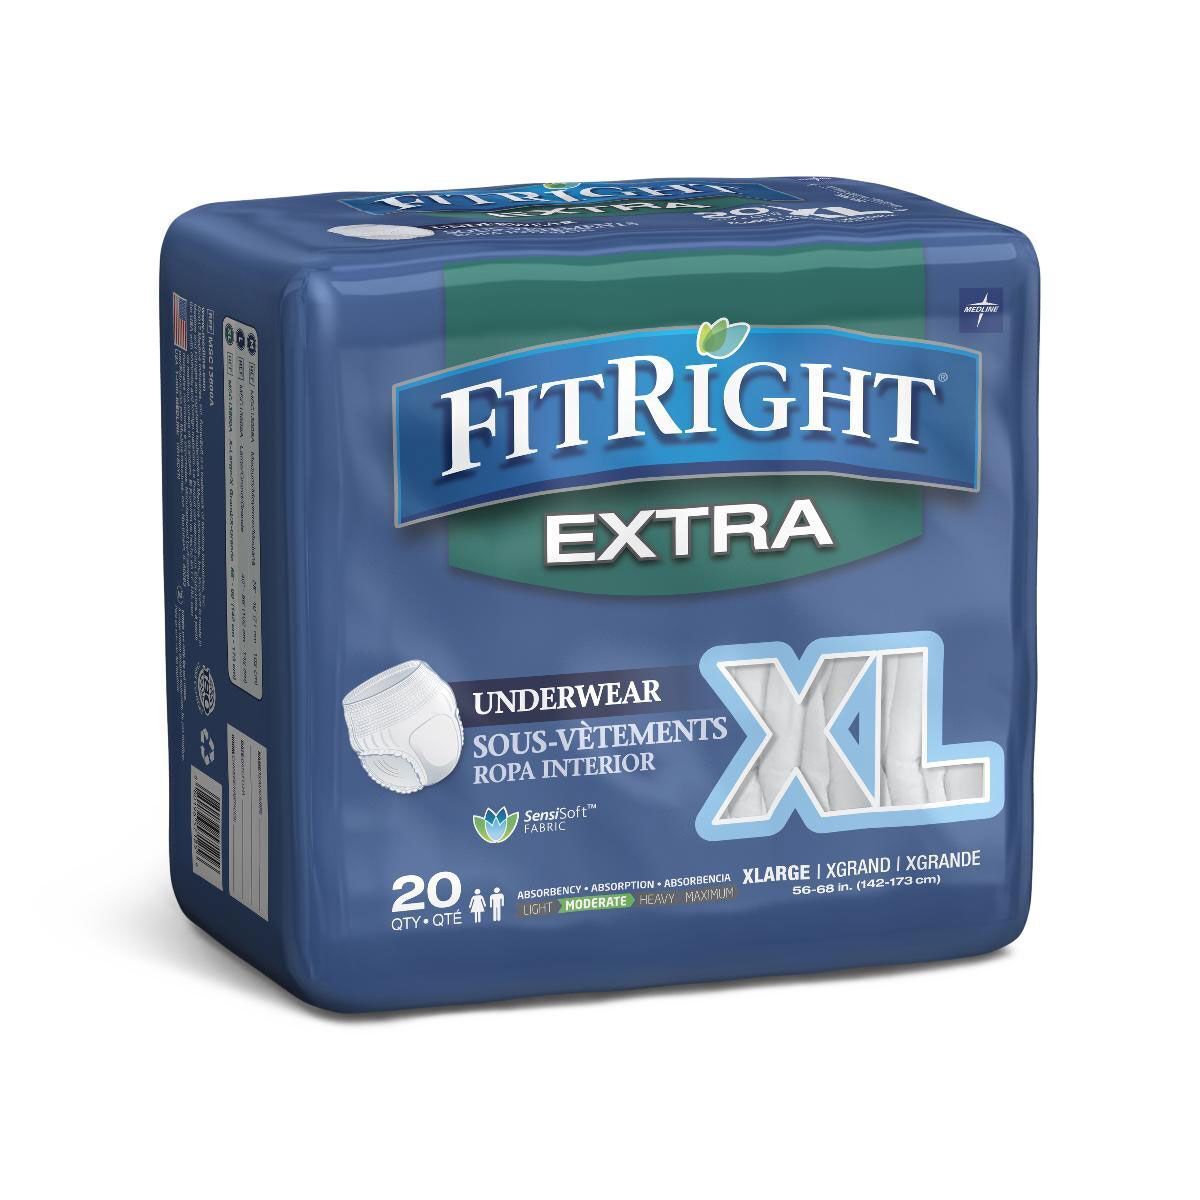 FitRight Extra Unisex Incontinence Underwear Diapers Medium, Large, XL 80 Ct